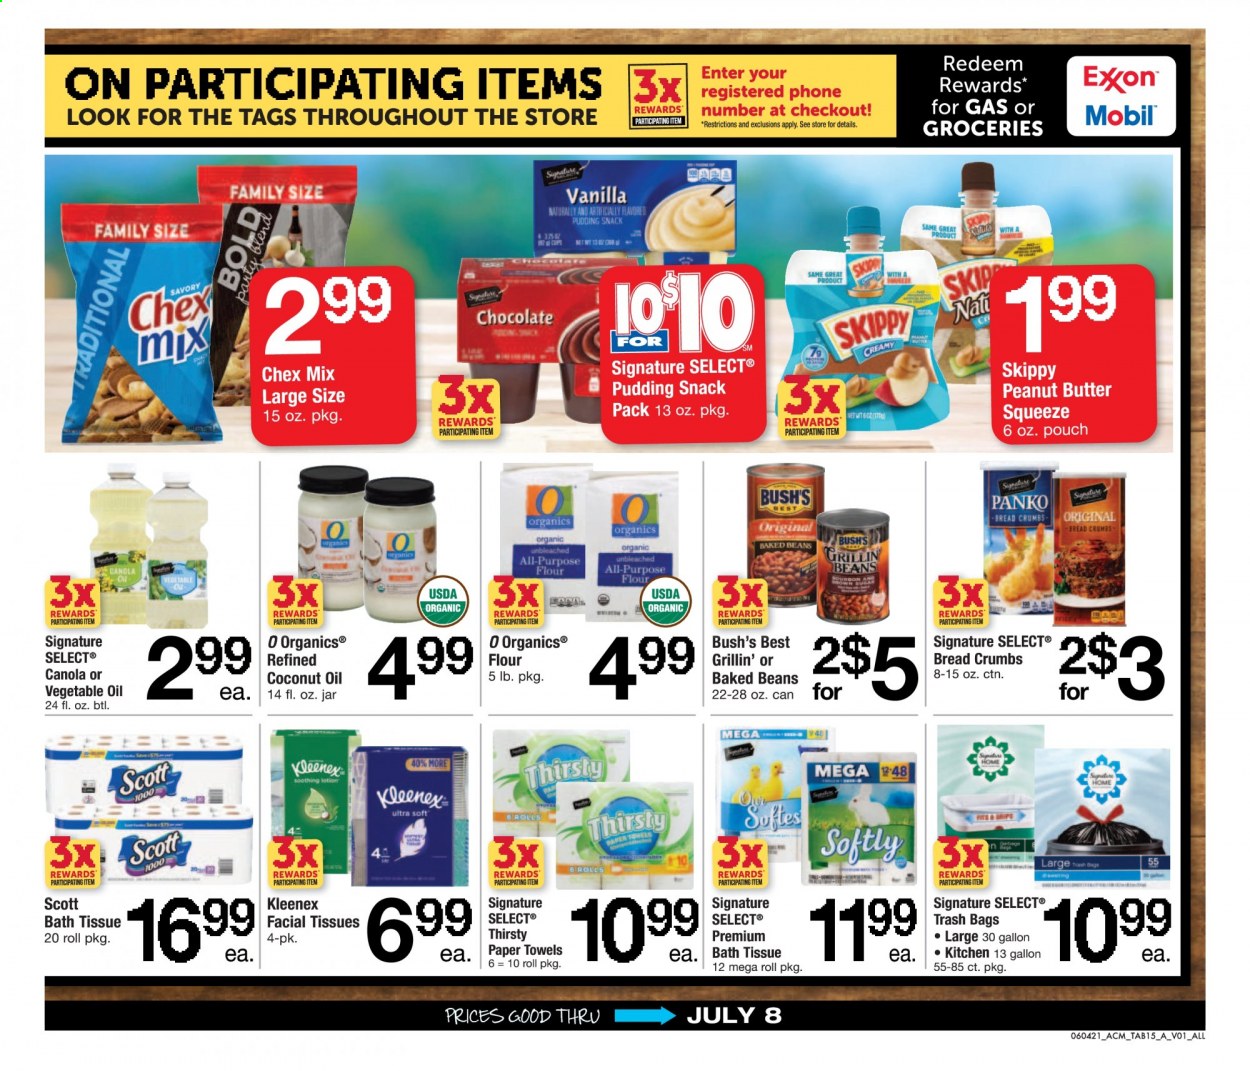 thumbnail - ACME Flyer - 06/04/2021 - 07/08/2021 - Sales products - Scott, breadcrumbs, panko breadcrumbs, beans, pudding, chocolate, Chex Mix, flour, sugar, baked beans, coconut oil, vegetable oil, oil, peanut butter, bath tissue, Kleenex, facial tissues, body lotion, trash bags, gallon, towel, bag. Page 15.